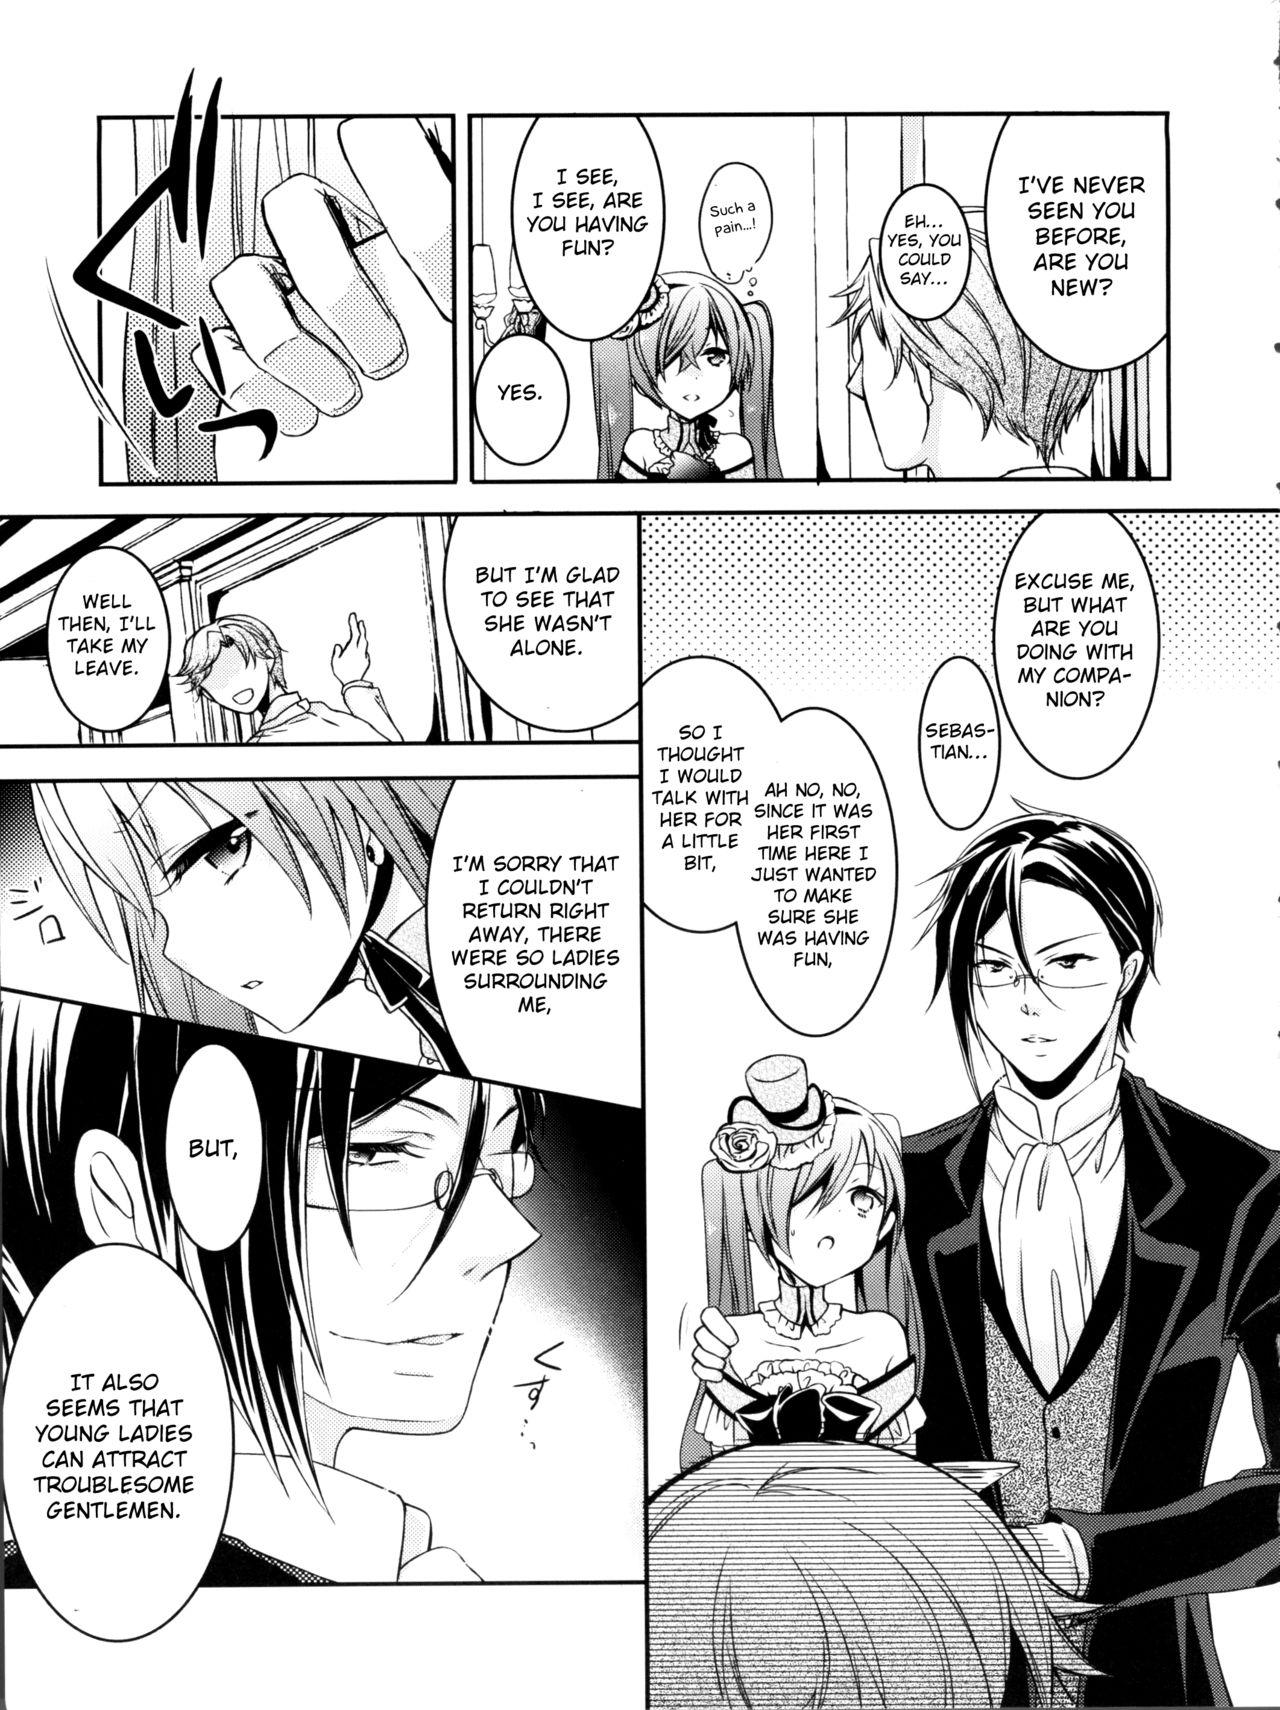 Pawg Apatite - Black butler Asshole - Page 4